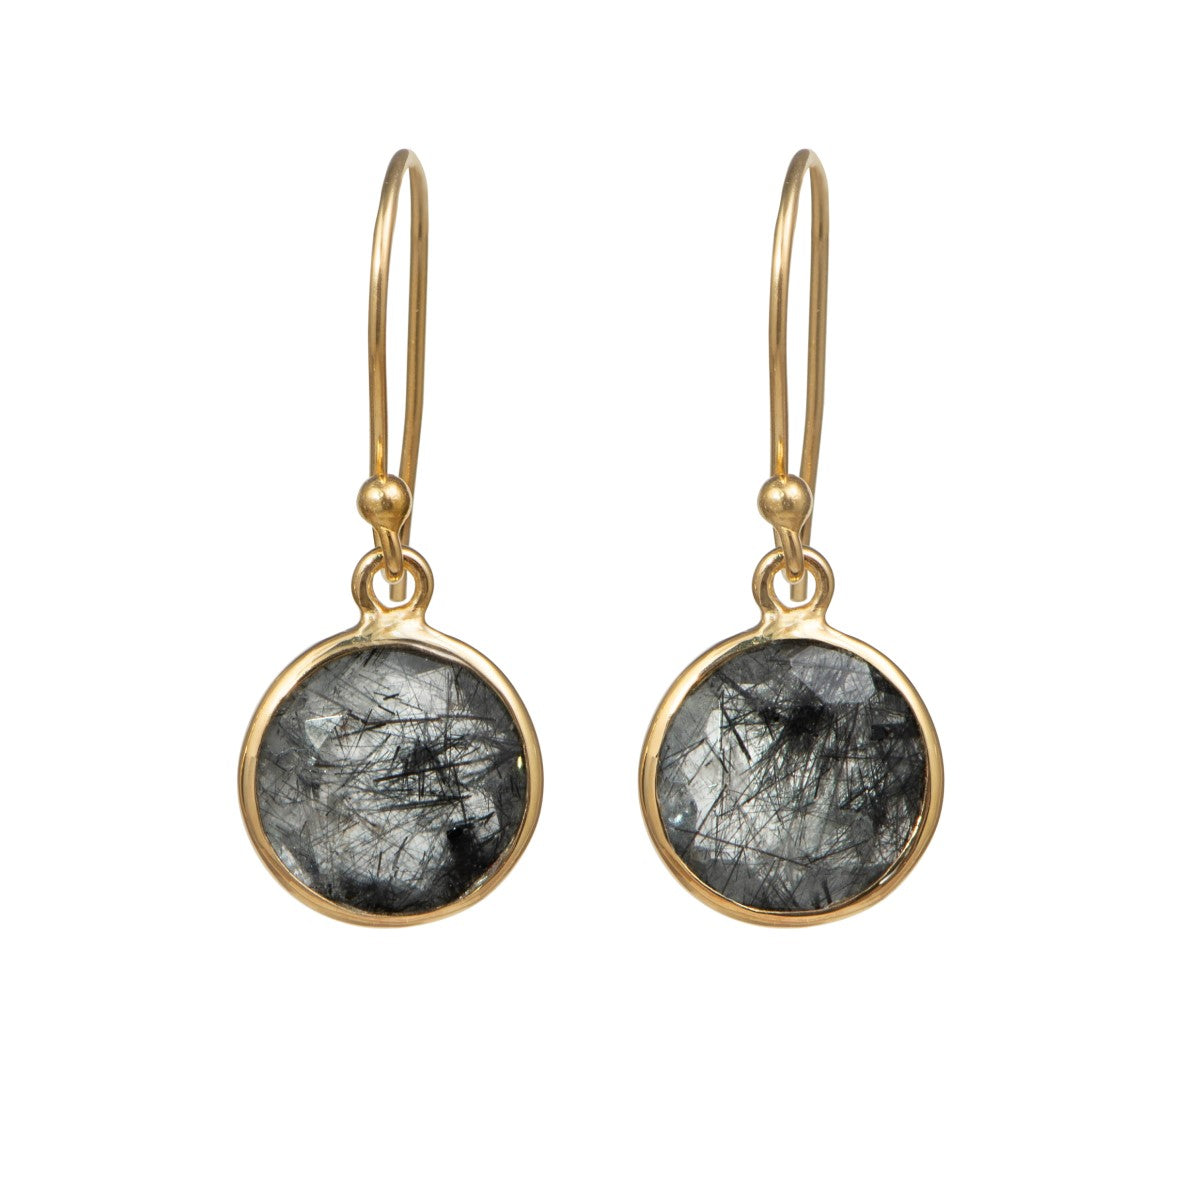 Black Rutilated Quartz Gold Plated Sterling Silver Earrings with a Round Faceted Gemstone Drop